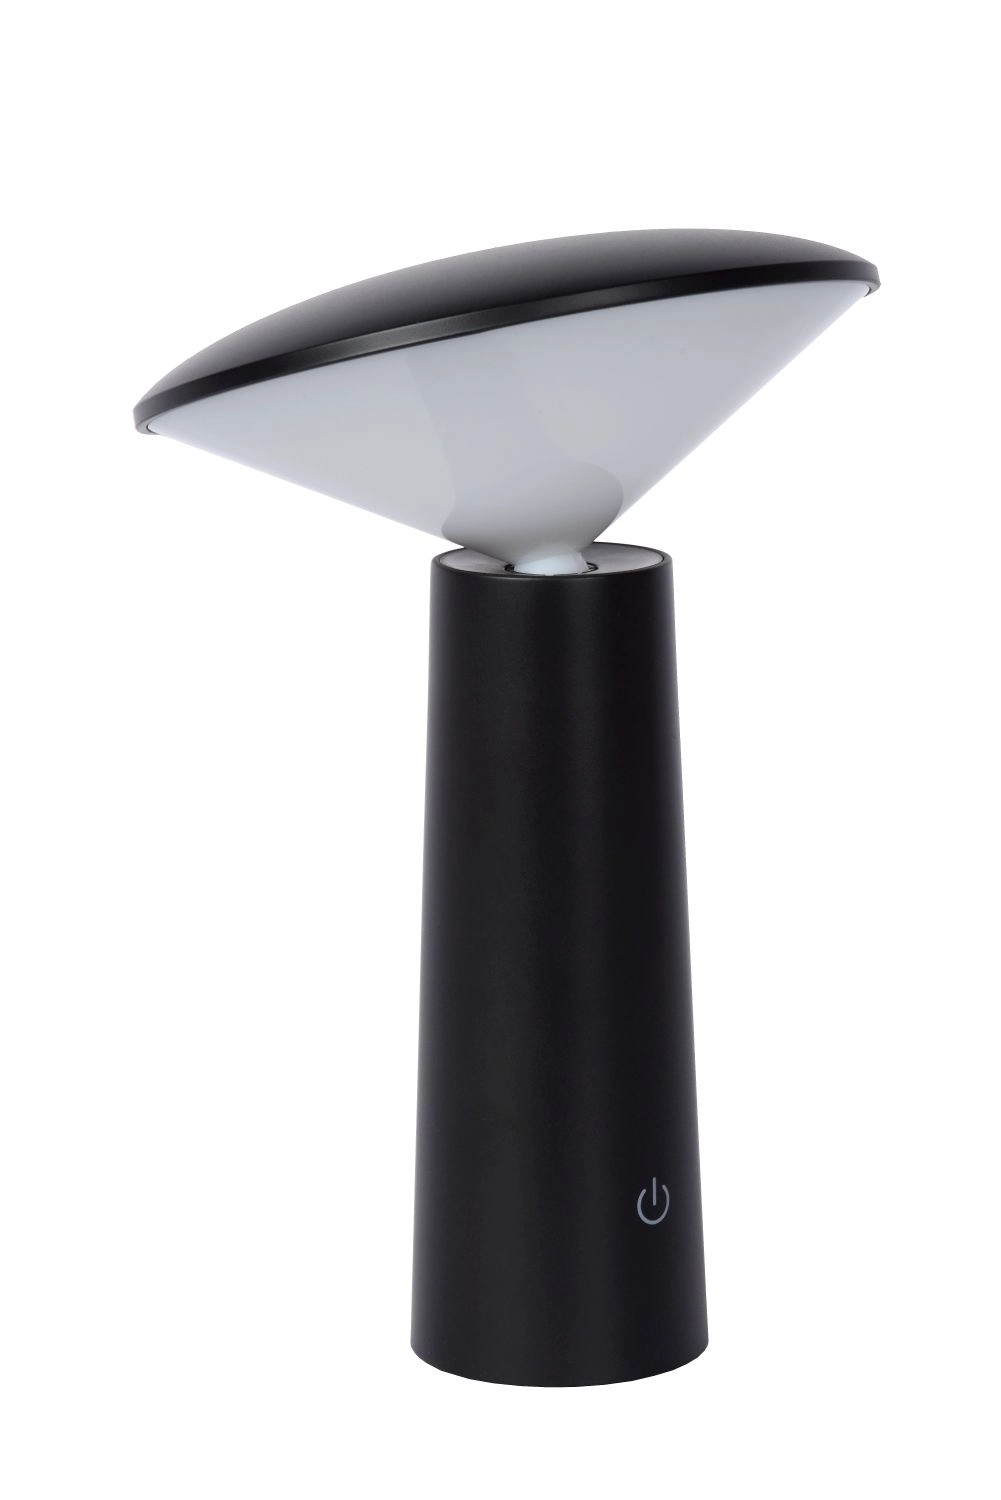 LU 02807/04/30 Lucide JIVE - Rechargeable Table lamp Outdoor - Battery - Ø 13,7 cm - LED Dim. - 1x4W